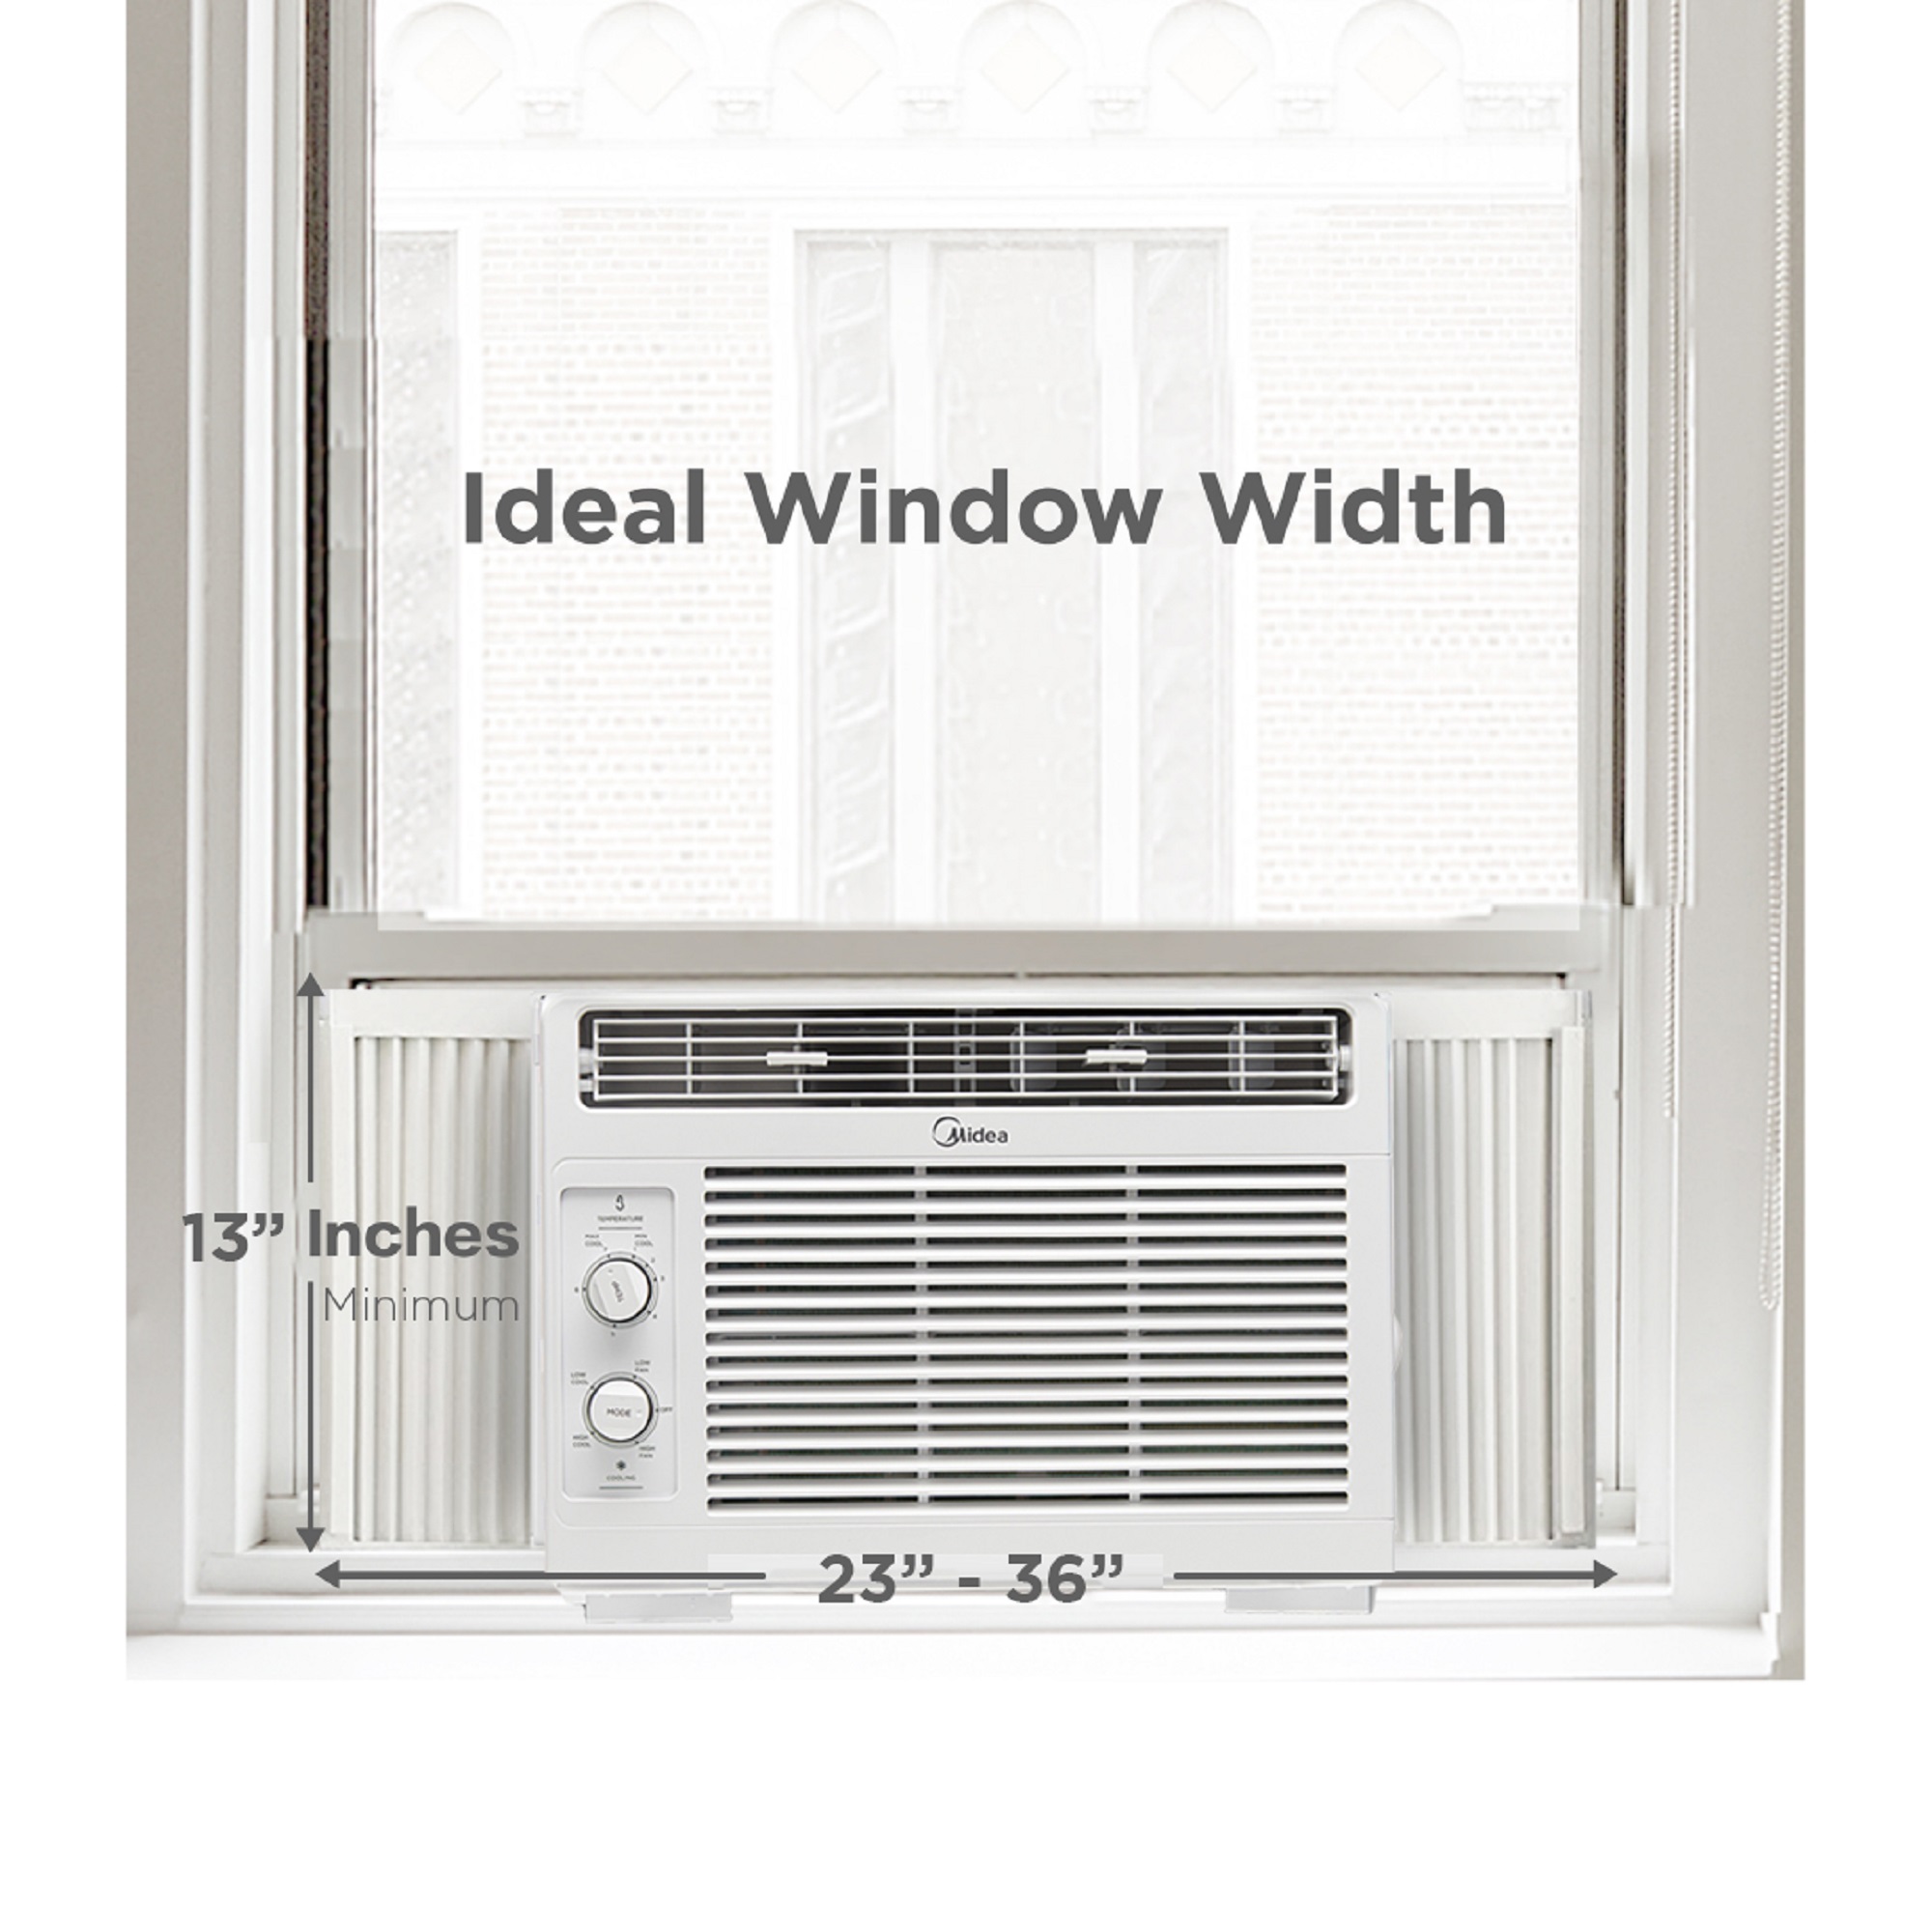 Midea 5,000 BTU 150 Sq Ft Mechanical Window Air Conditioner, White, MAW05M1WWT - image 3 of 17